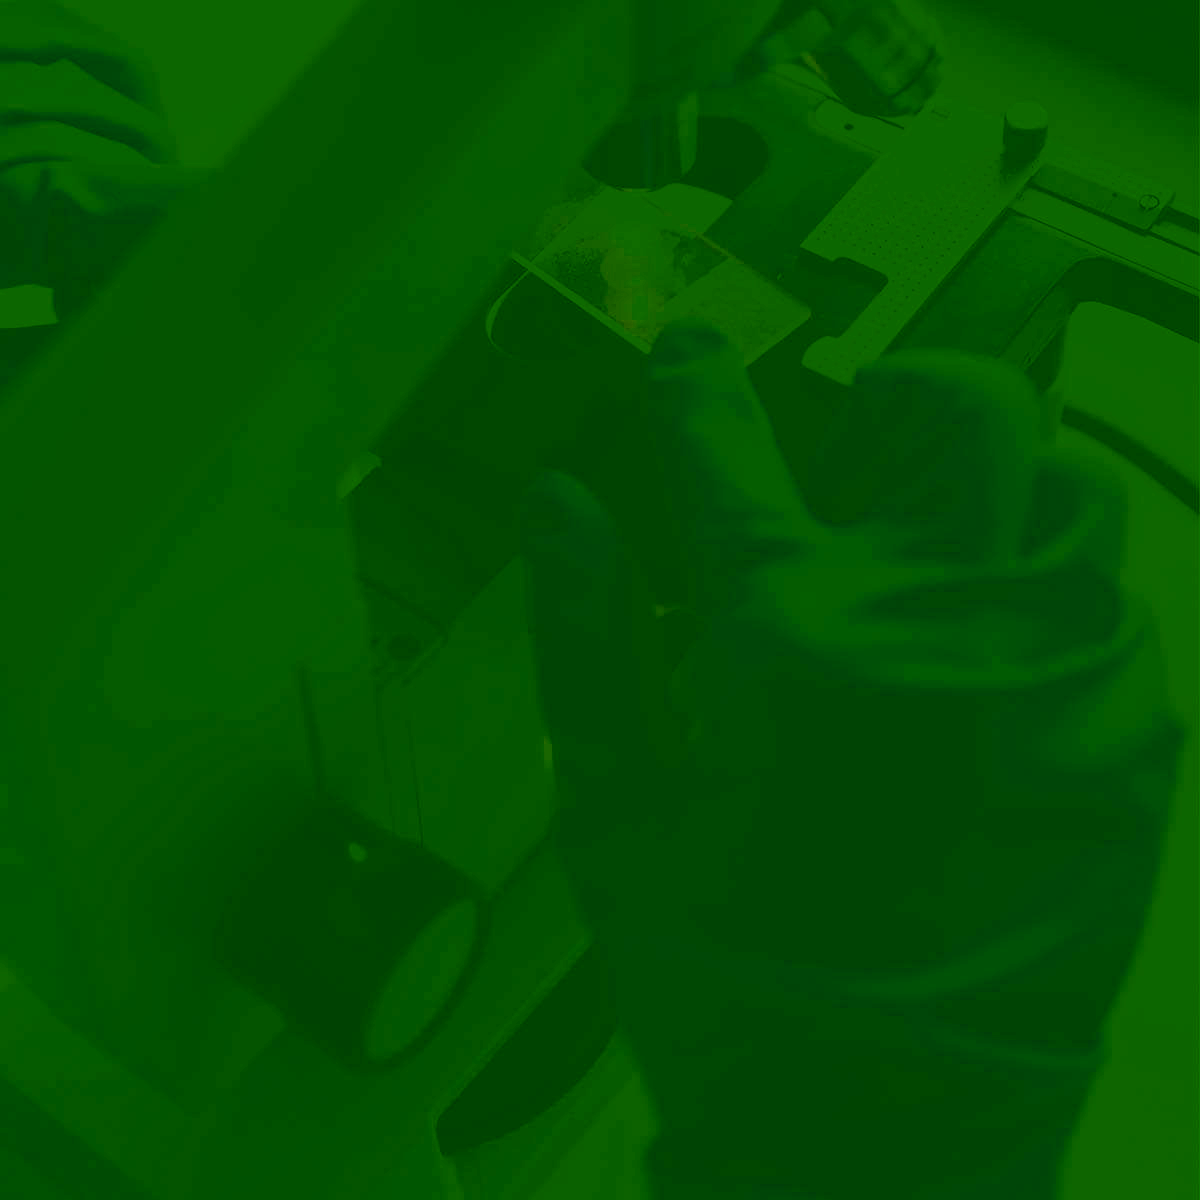 green themed image of someone testing